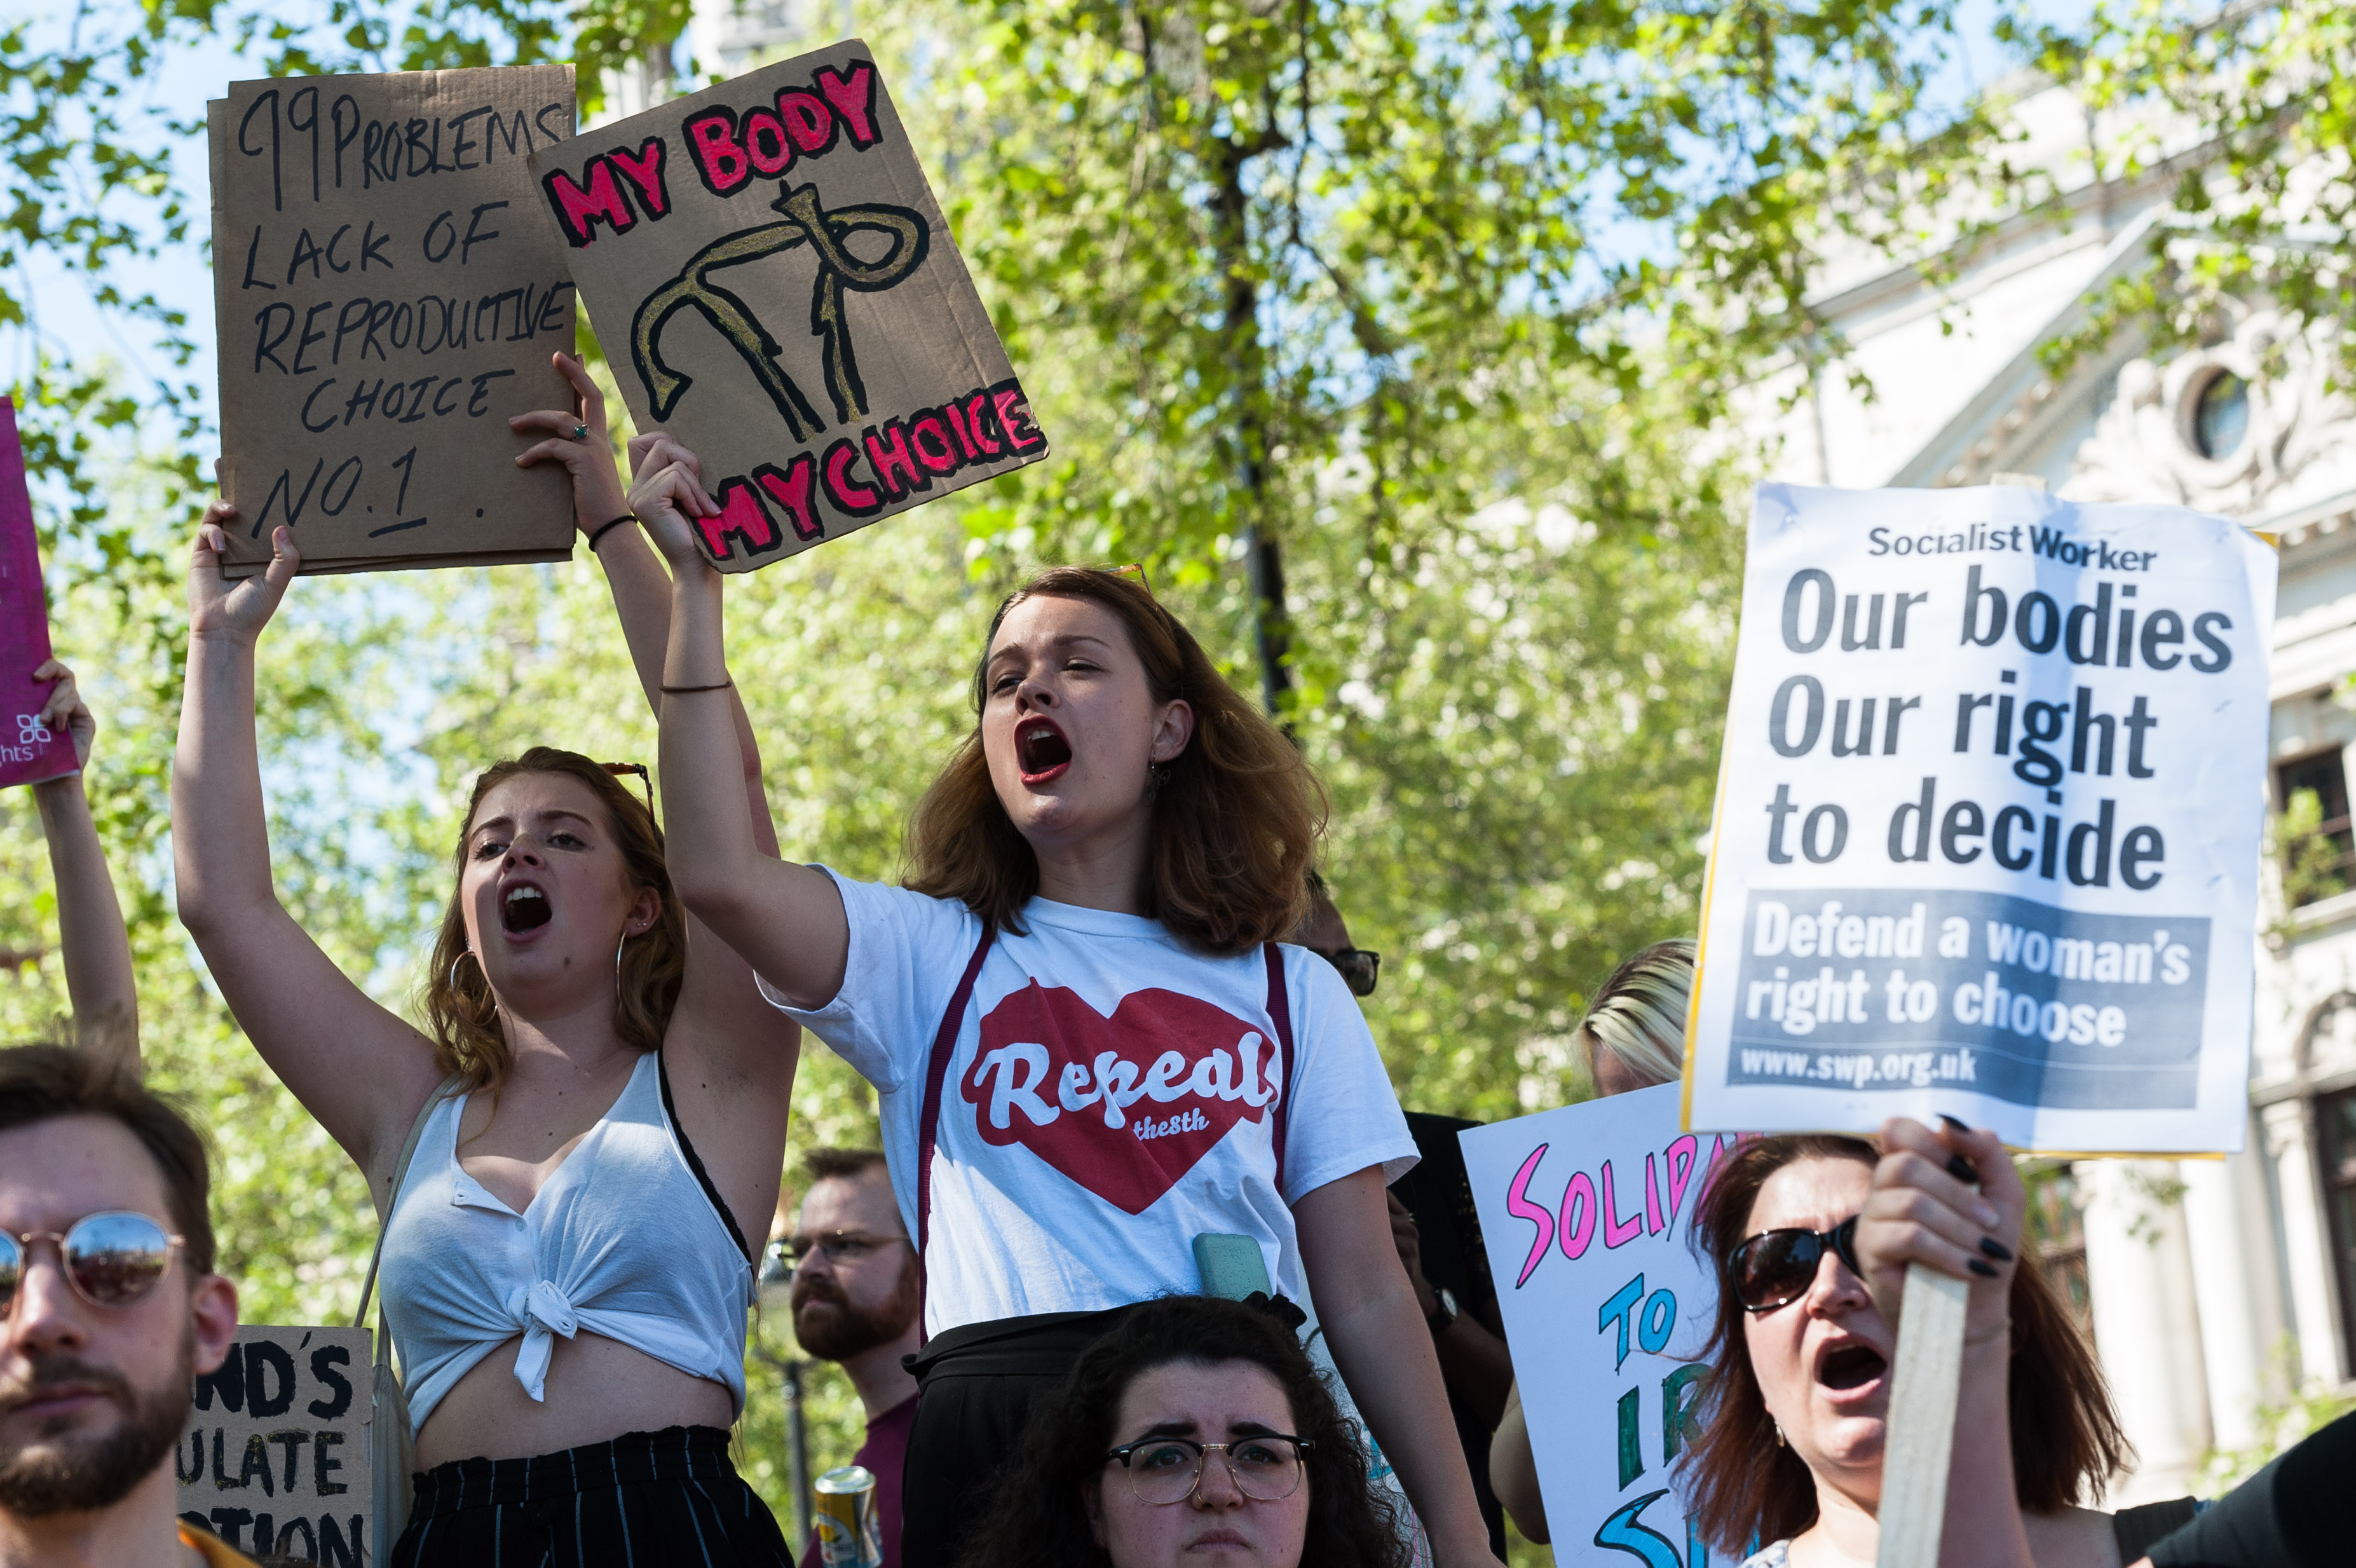 Pro-repeal supporters stage a demonstration in Parliament Square in London on May 5 2018 (Wiktor Szymanowicz –Barcroft Media/Getty Images)